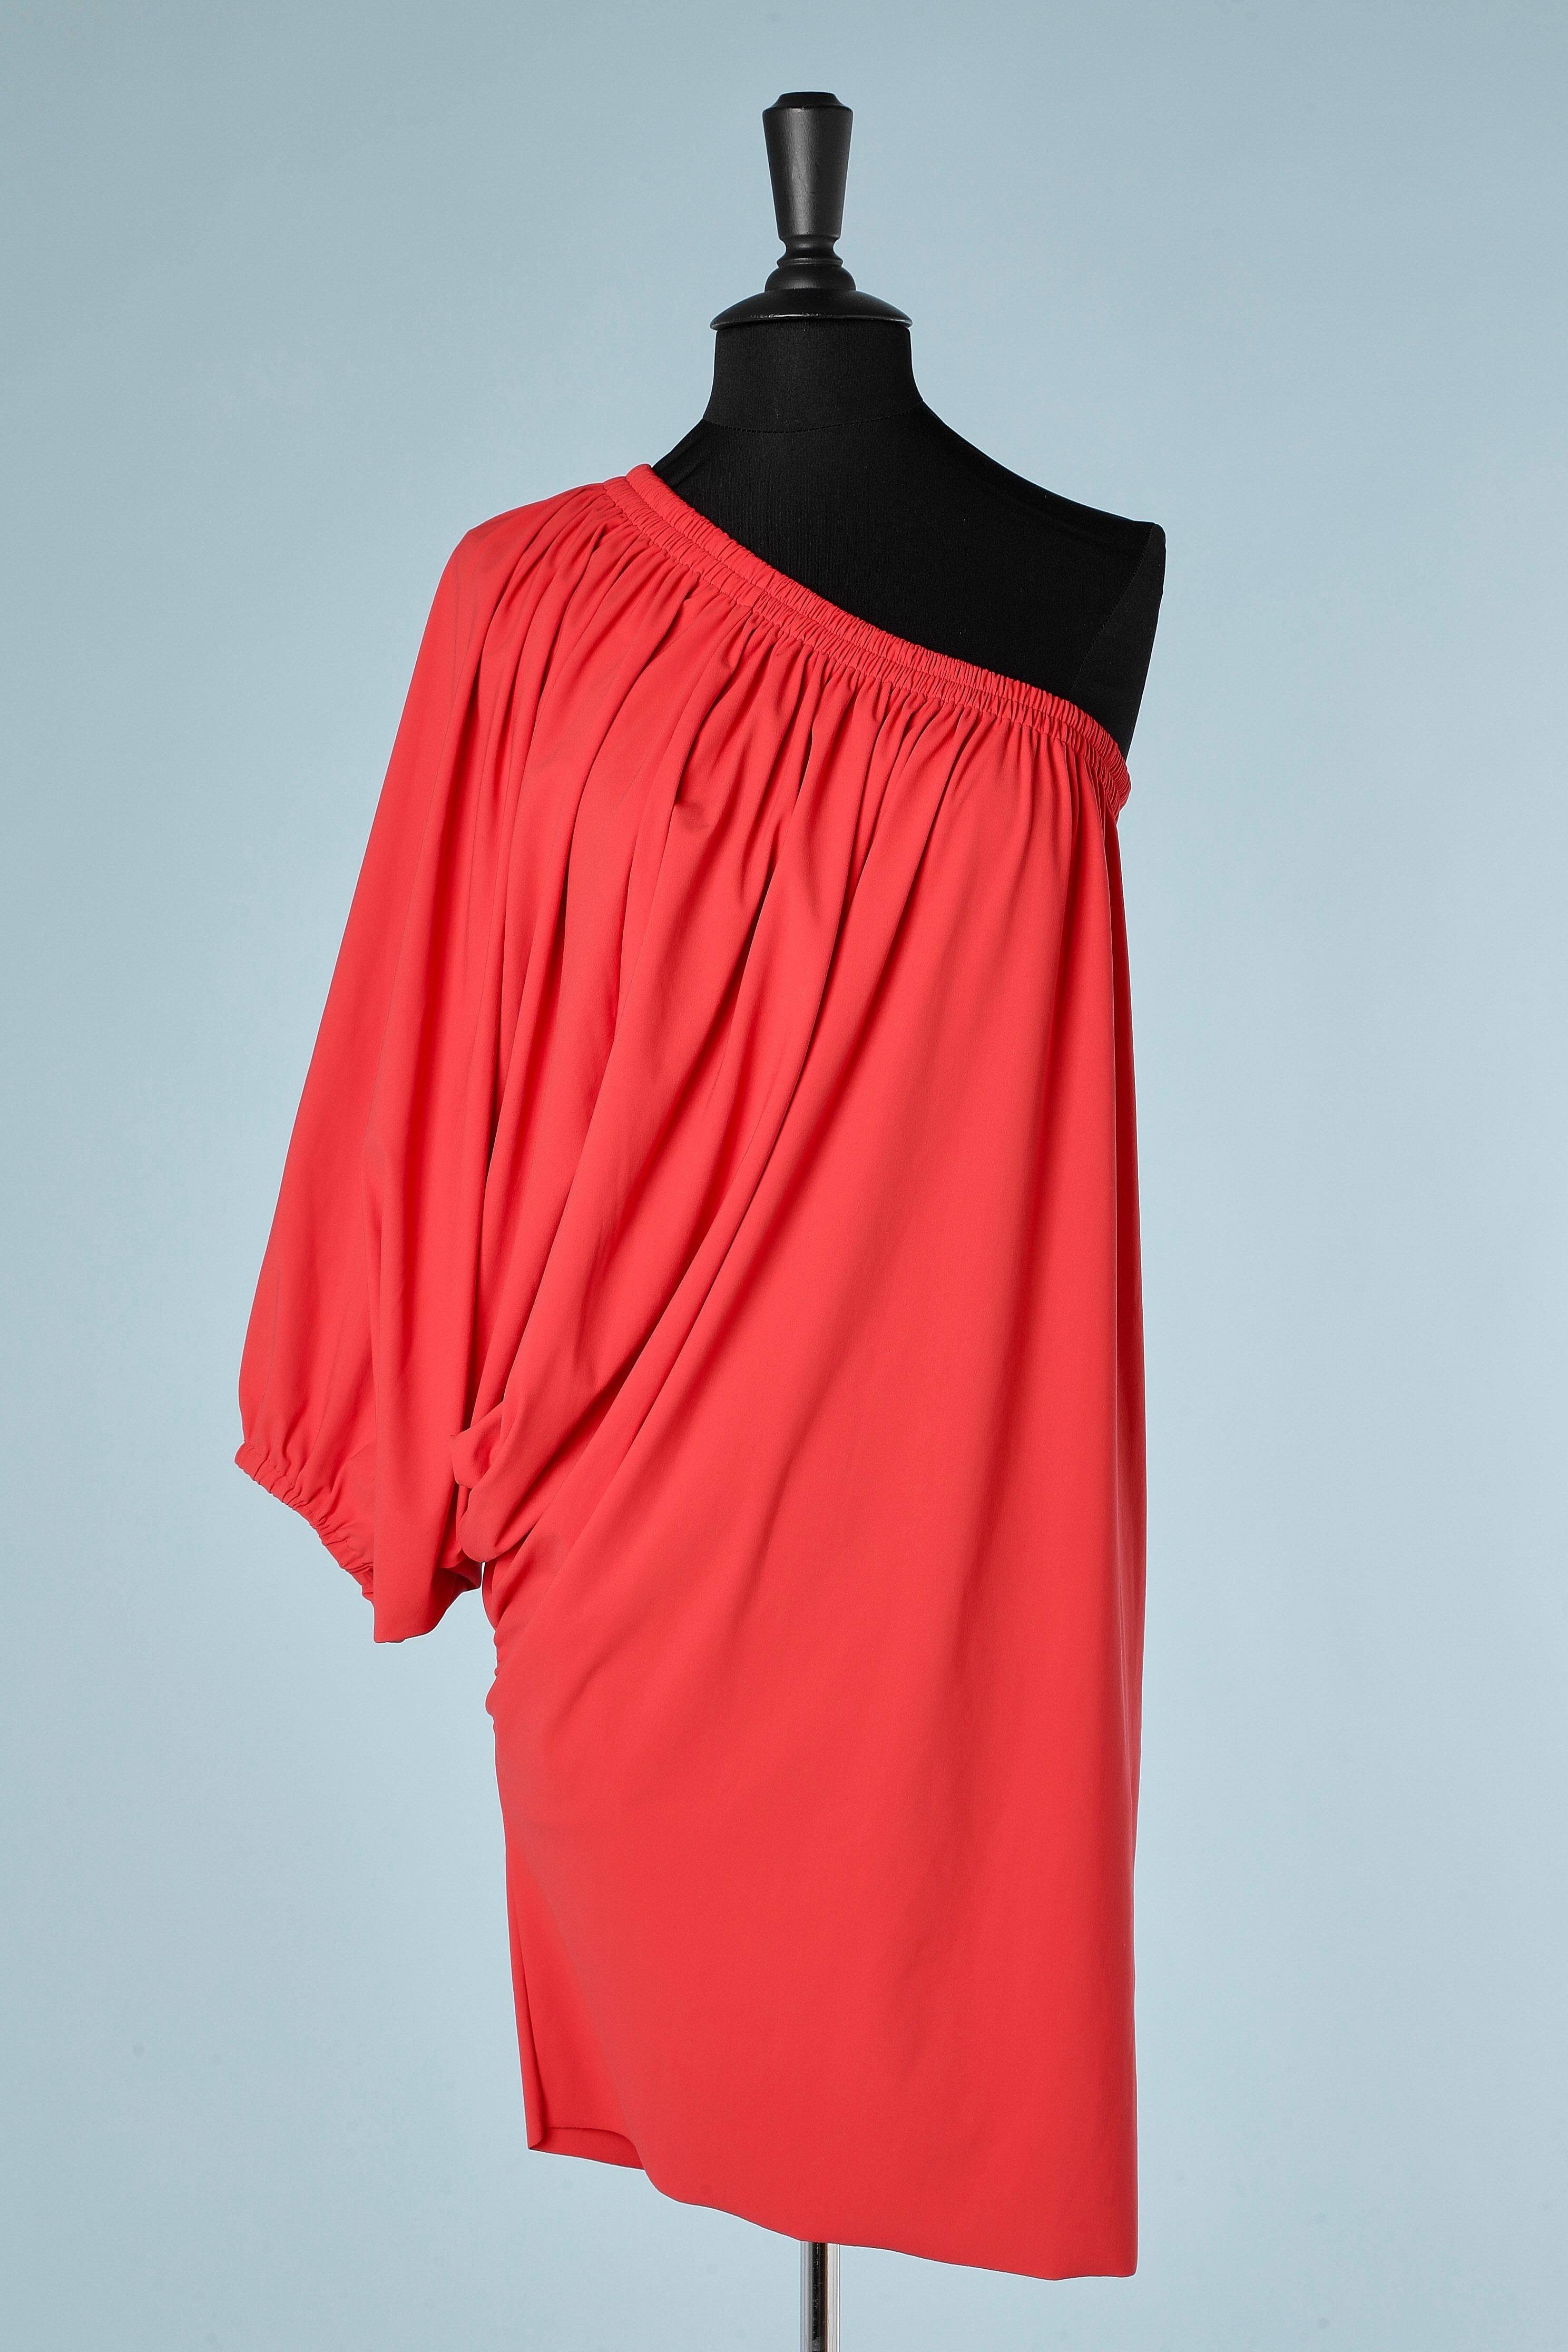 Red  asymmetrical stretch jersey top with gather on the neckline.
SIZE 40